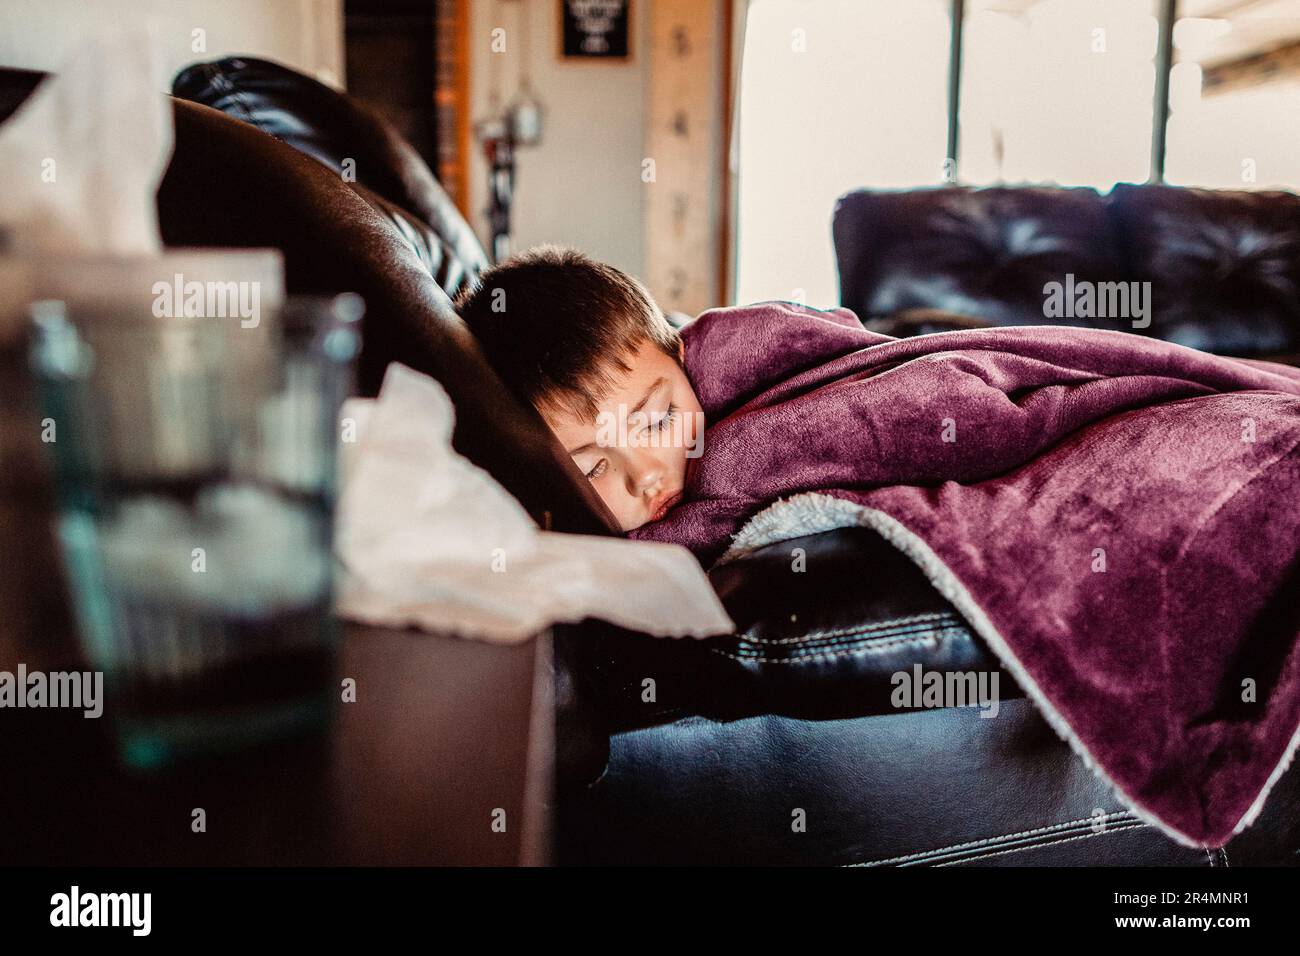 Young boy napping not feeling well Stock Photo